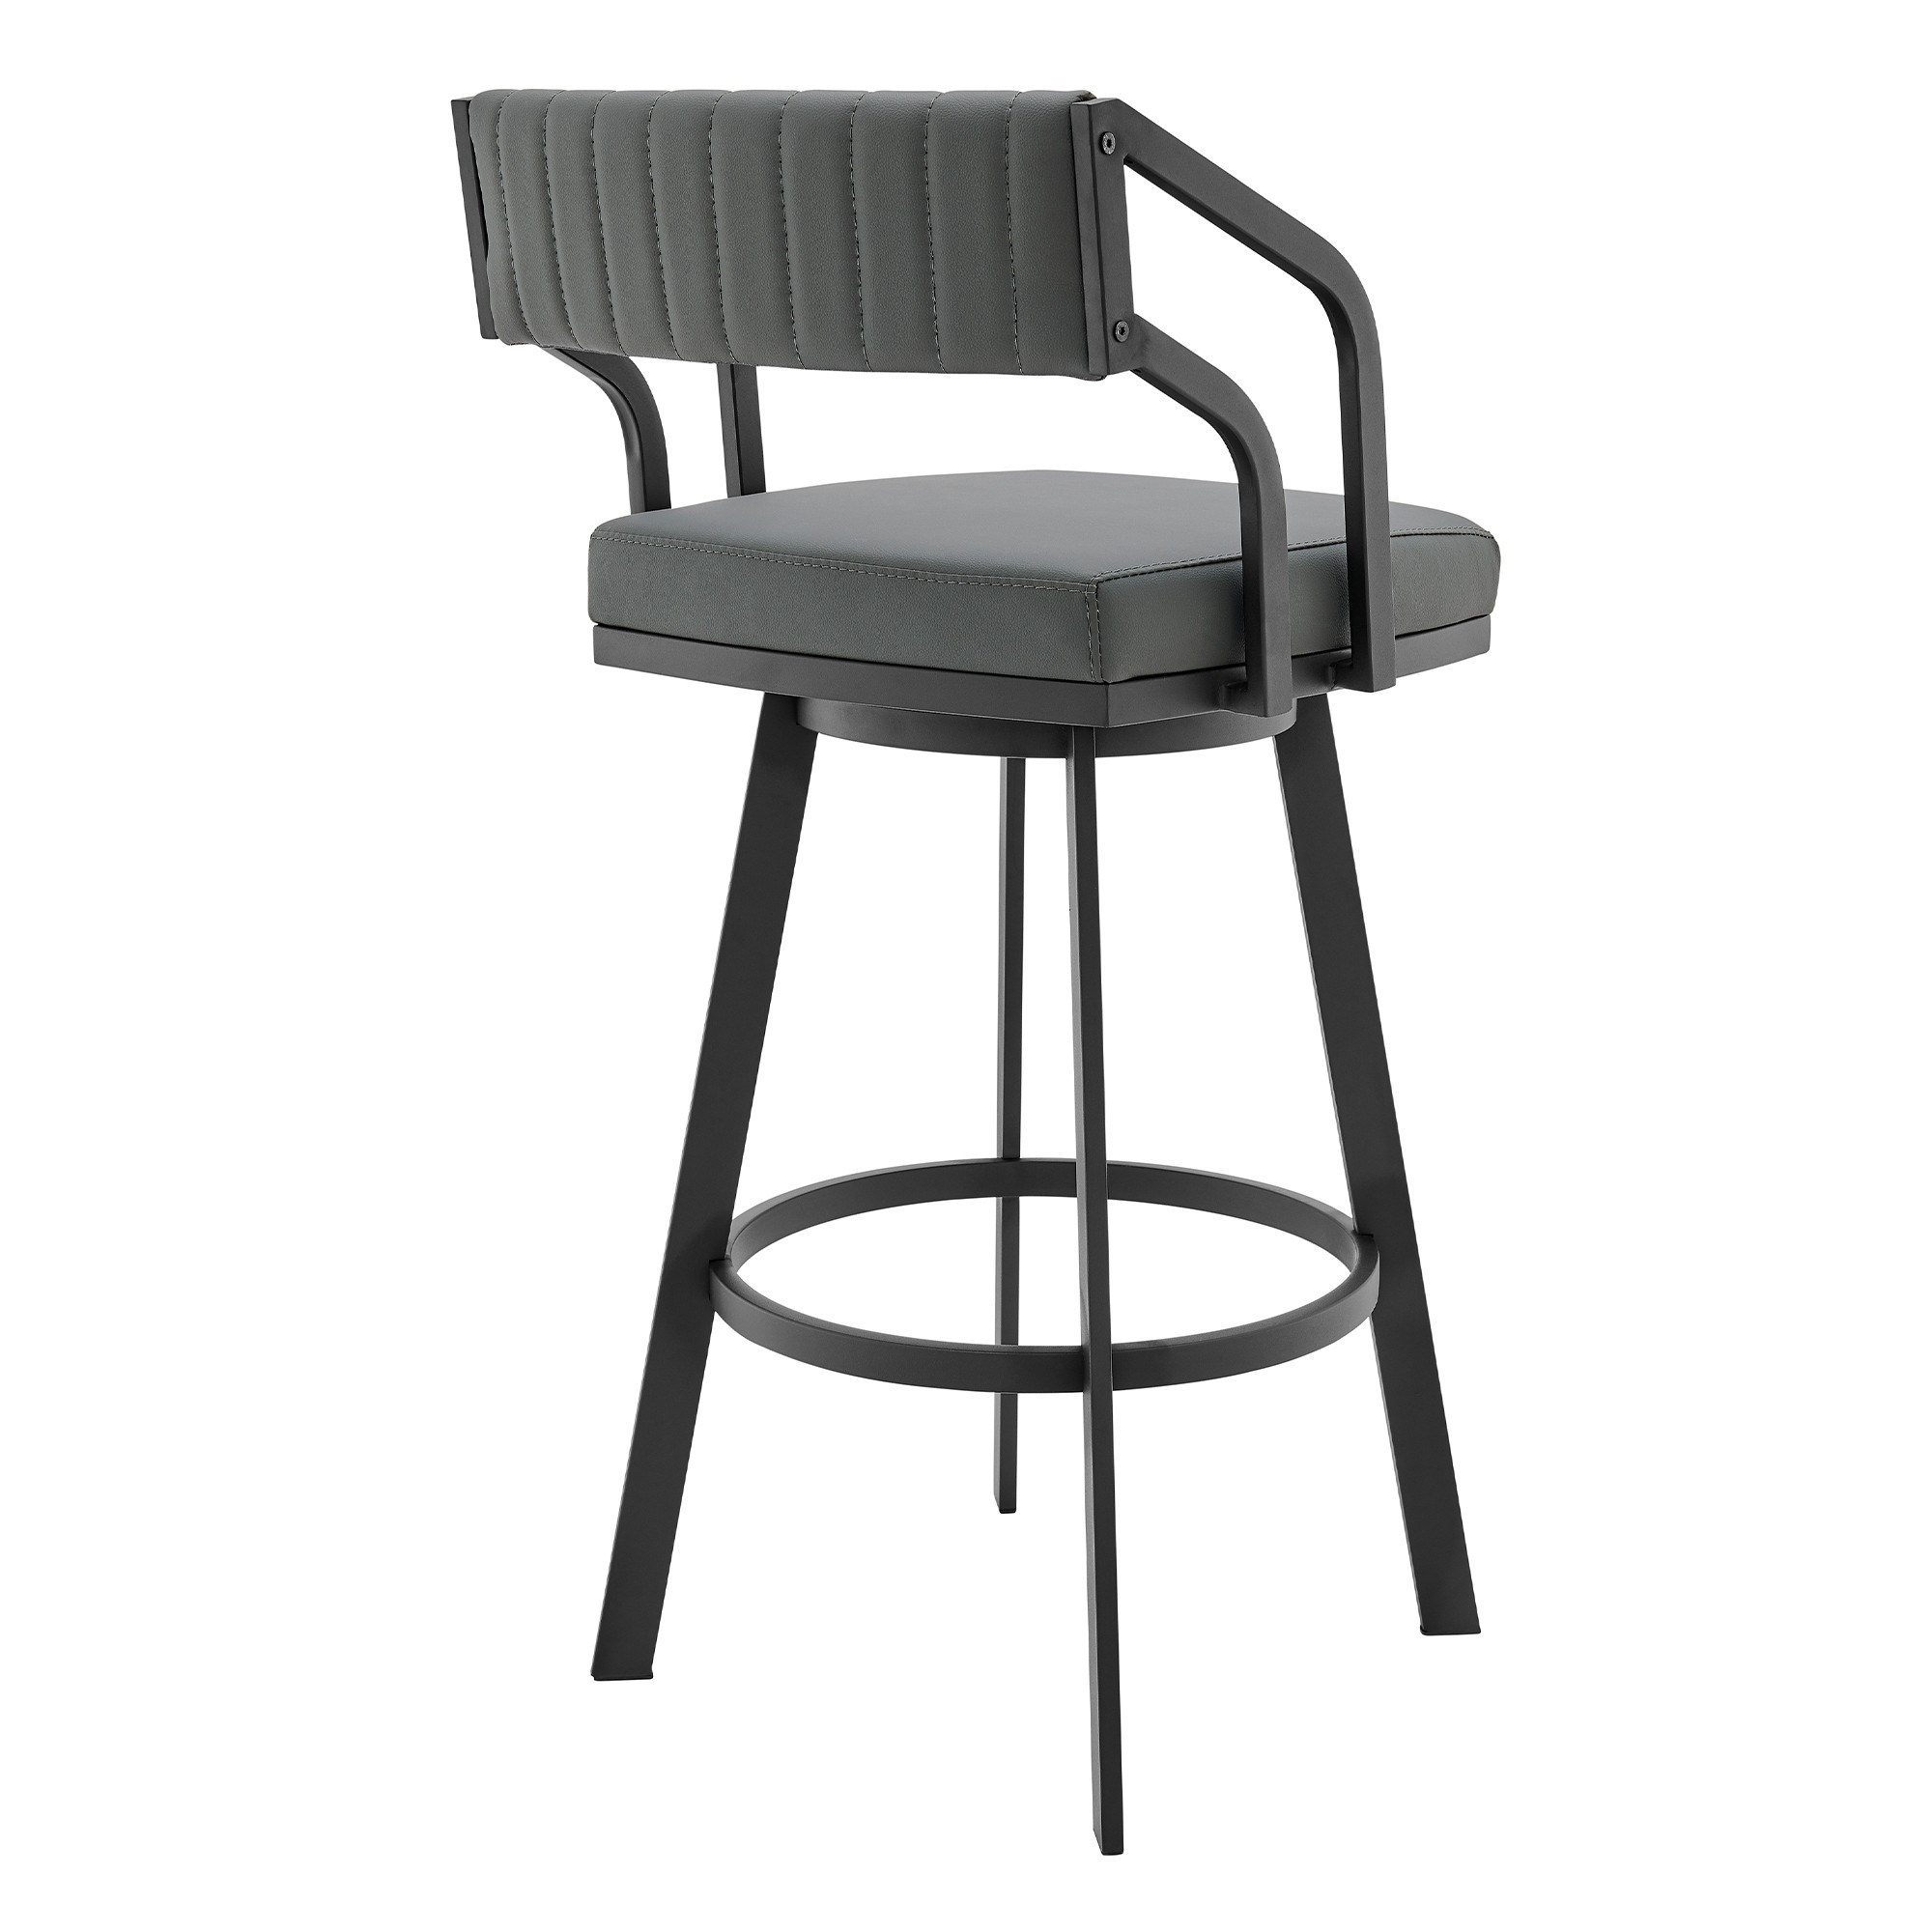 30 Inch Swivel Barstool Chair, Open Sloped Arms, Gray Faux Leather, Black- Saltoro Sherpi